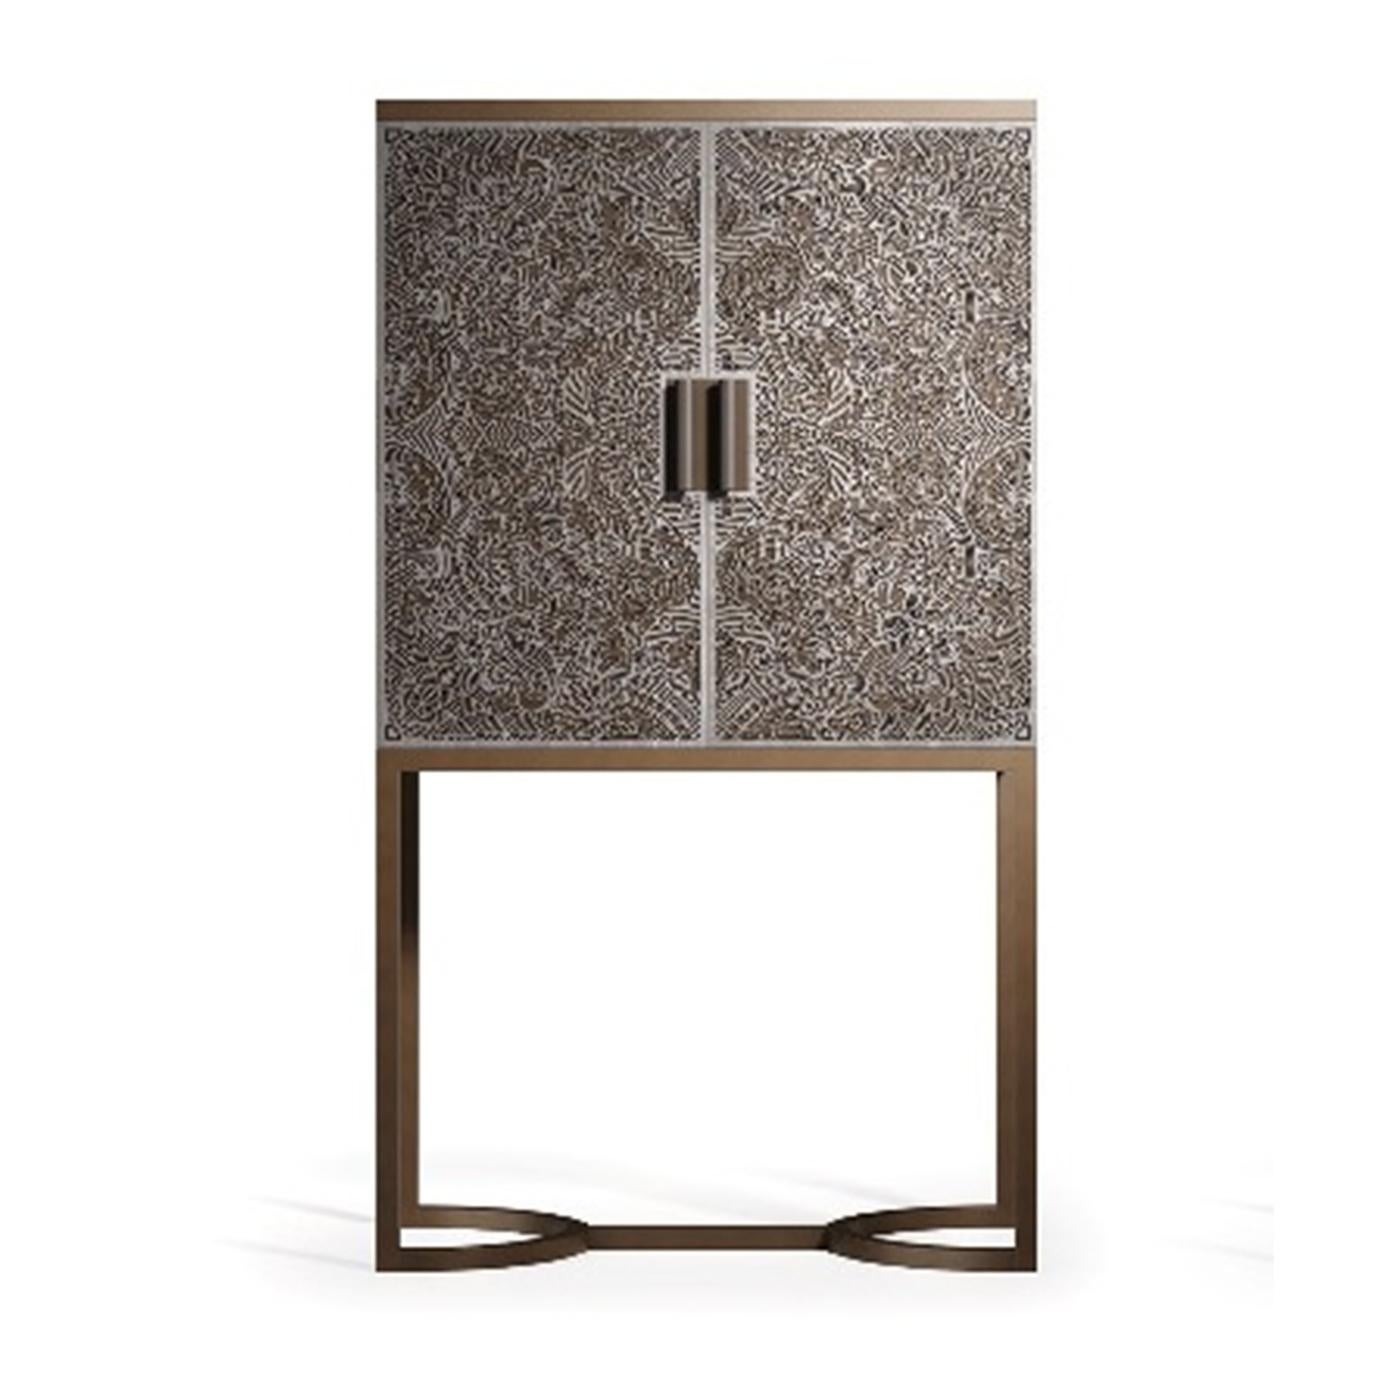 Contemporary aesthetic and traditional craftsmanship merge to create this refined bar cabinet. The matte gray metal base has an architectural feel with its two semi-circular legs connected by a straight bar. The square wood top features an